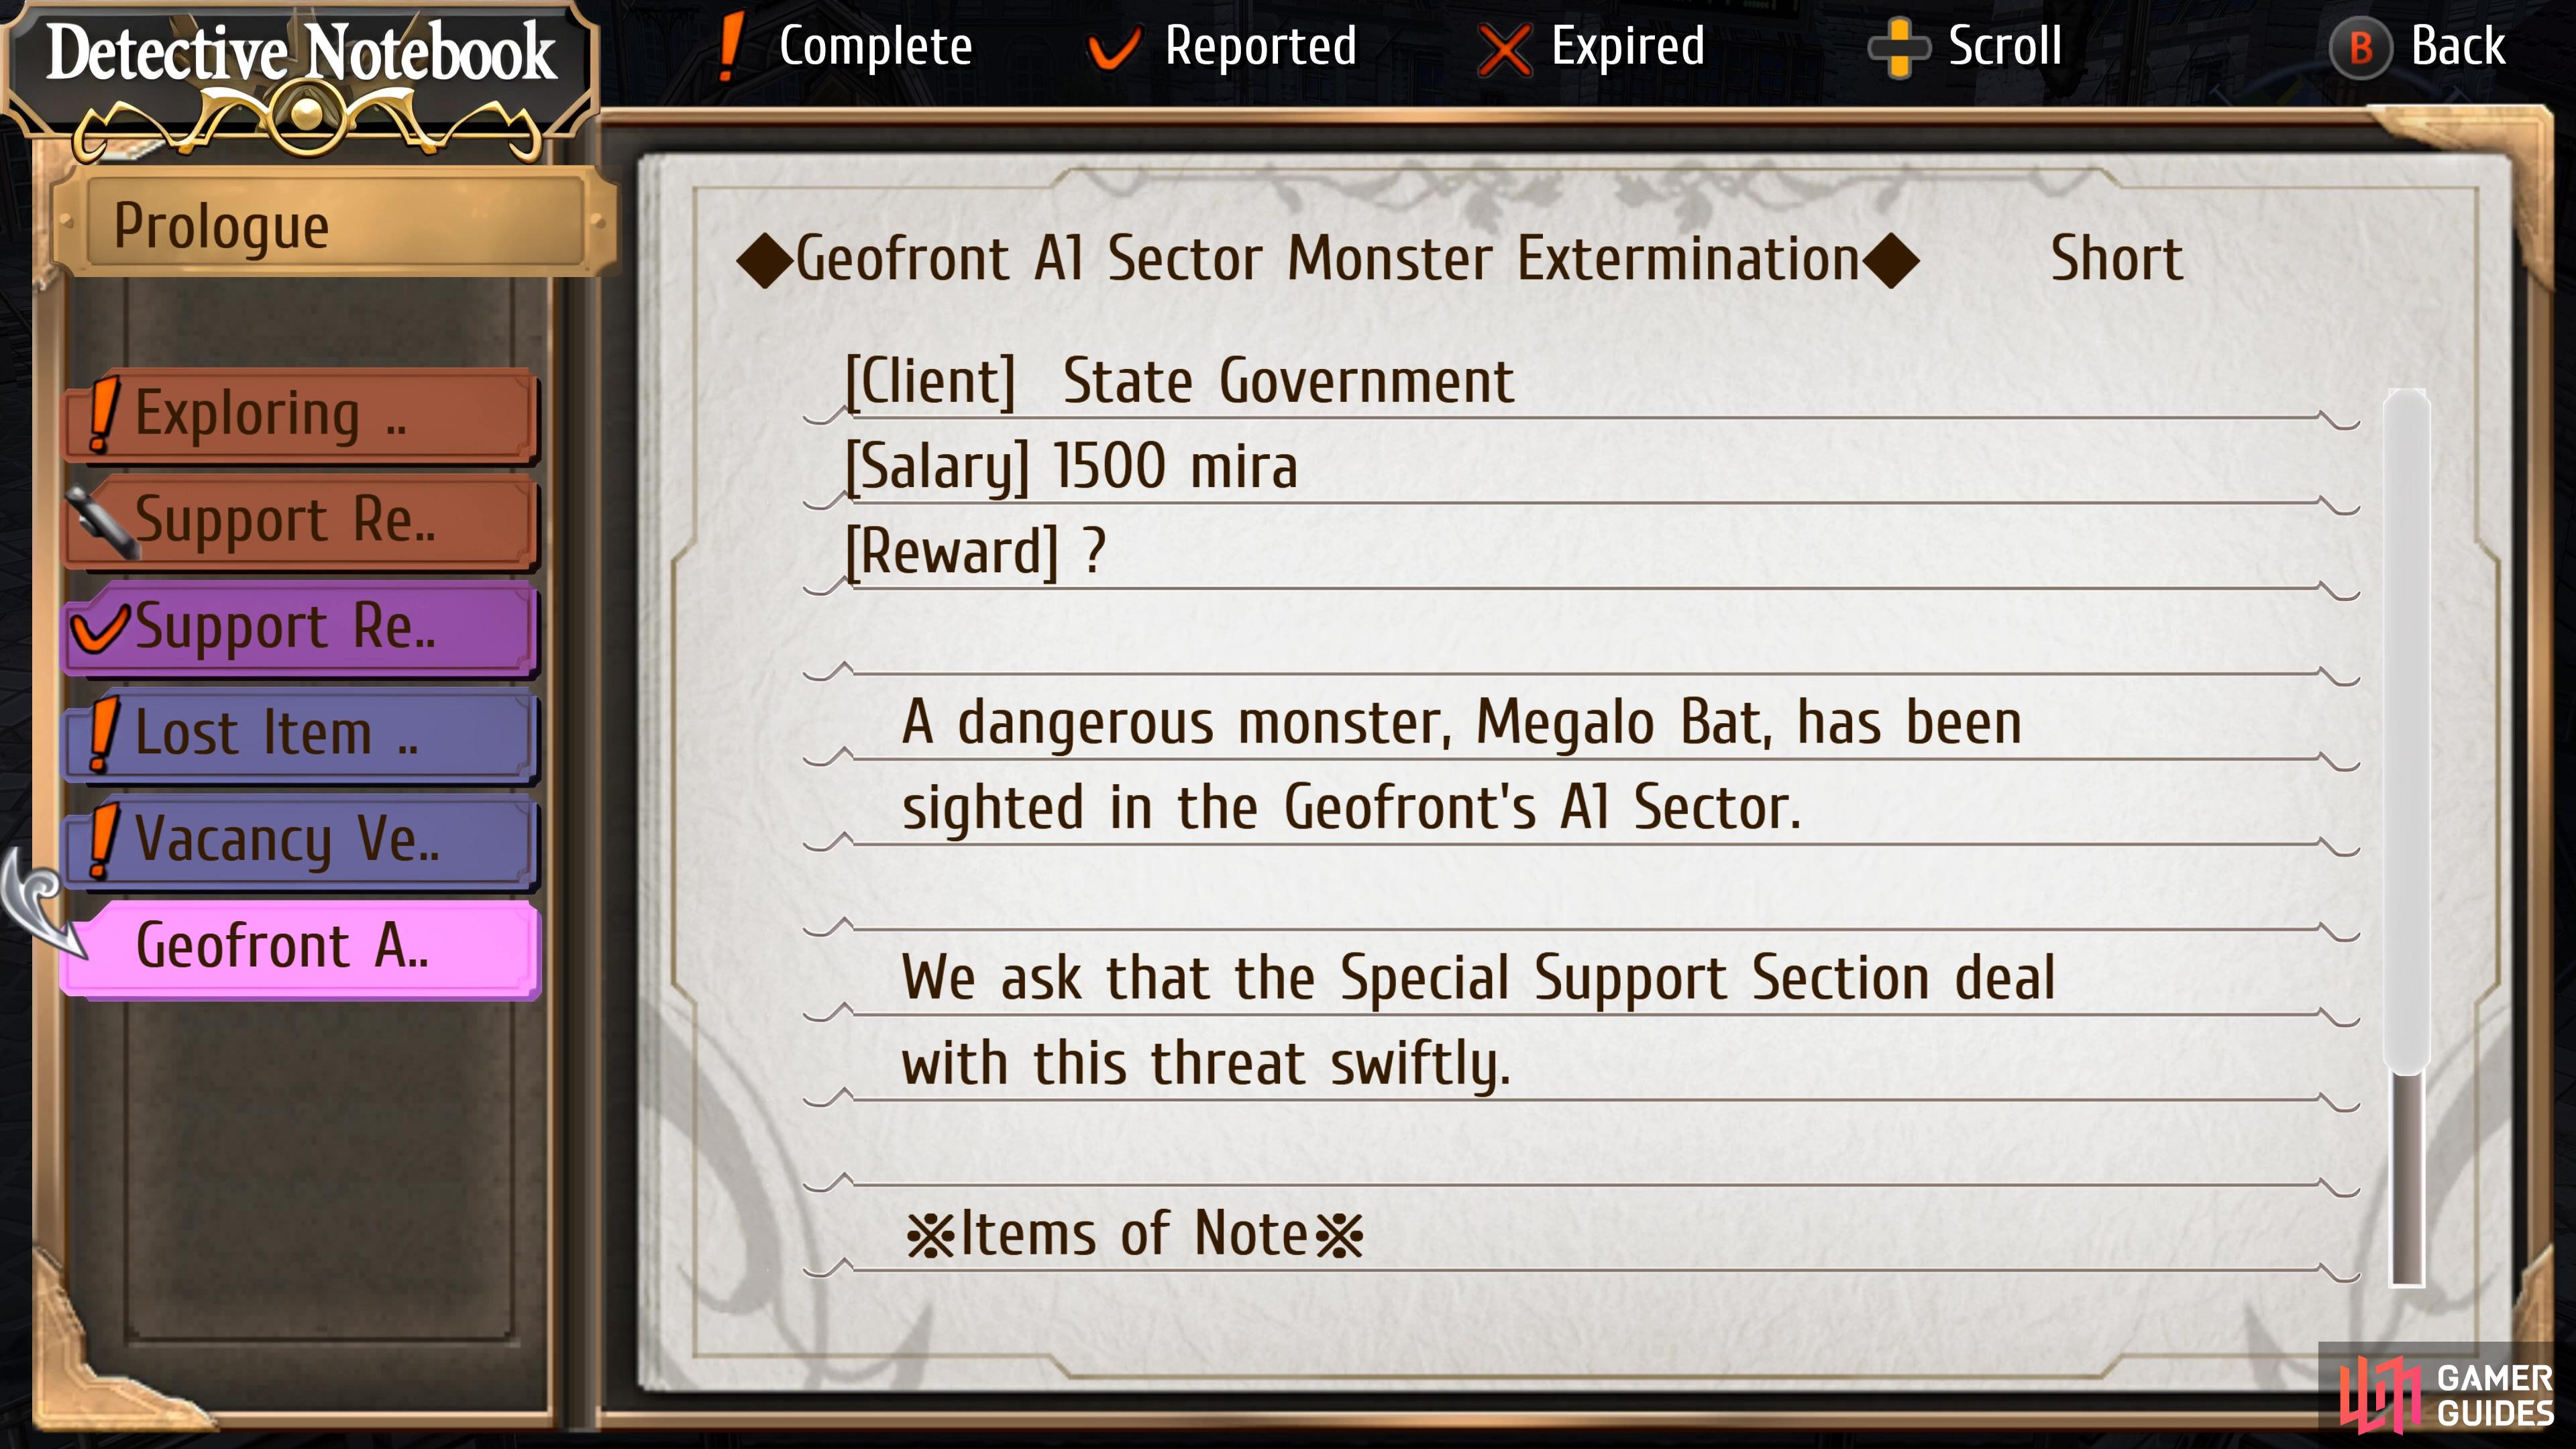 Geofront A1 Sector Monster Extermination.